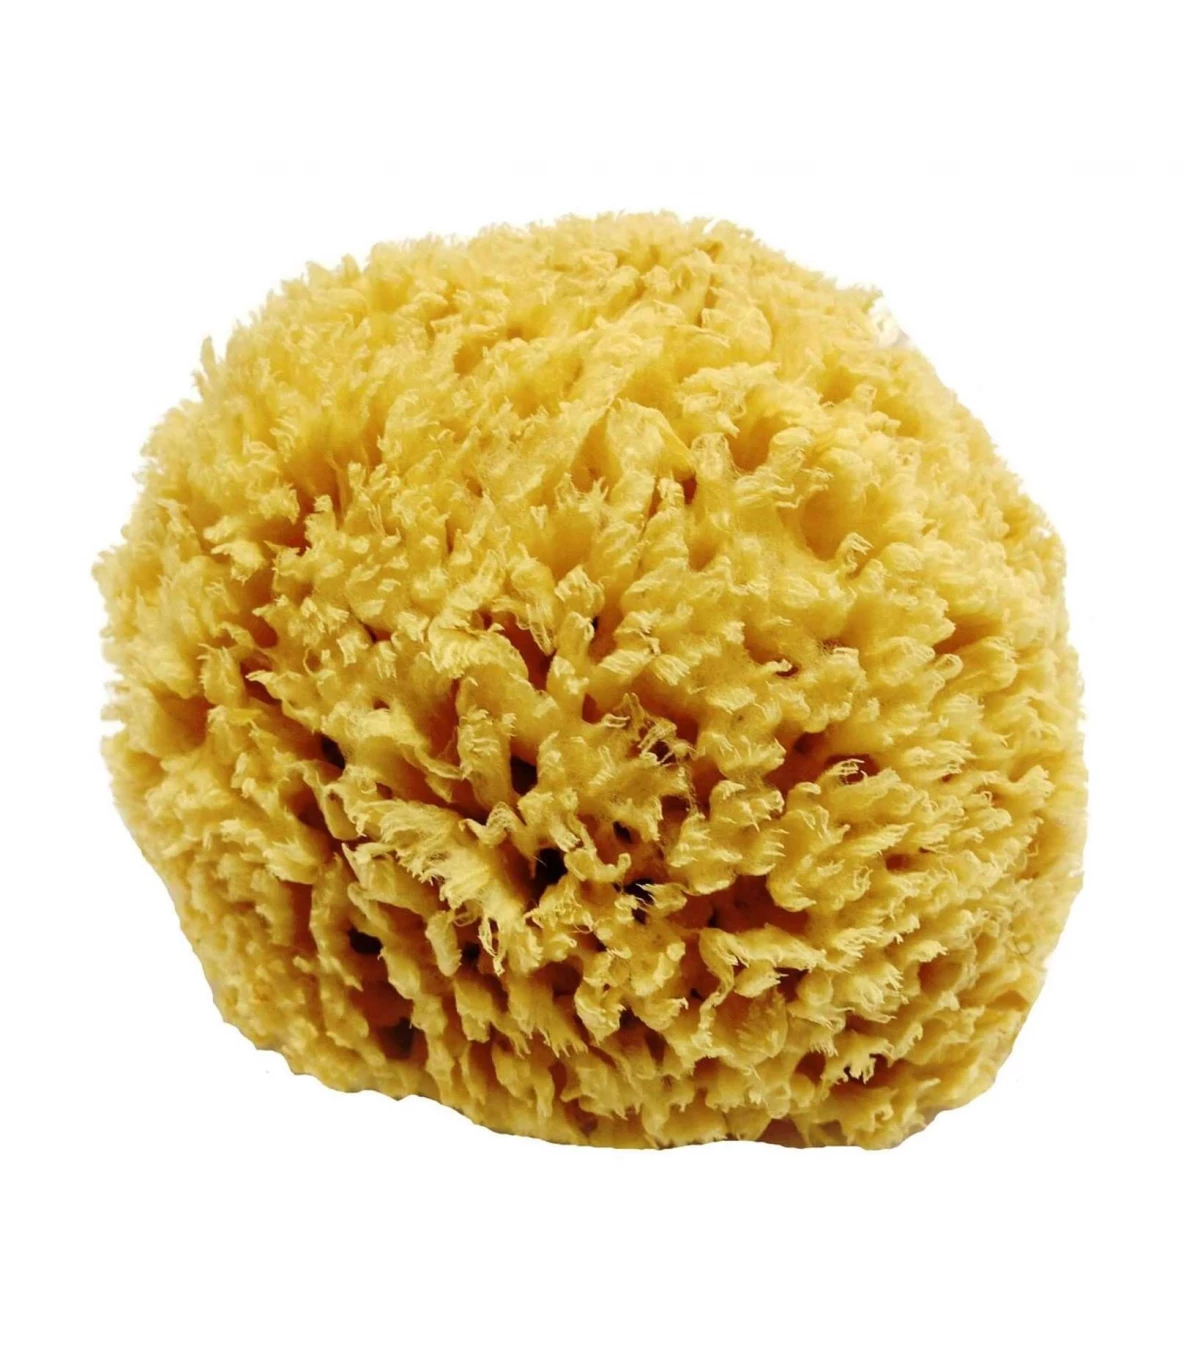 What is a natural sea sponge?